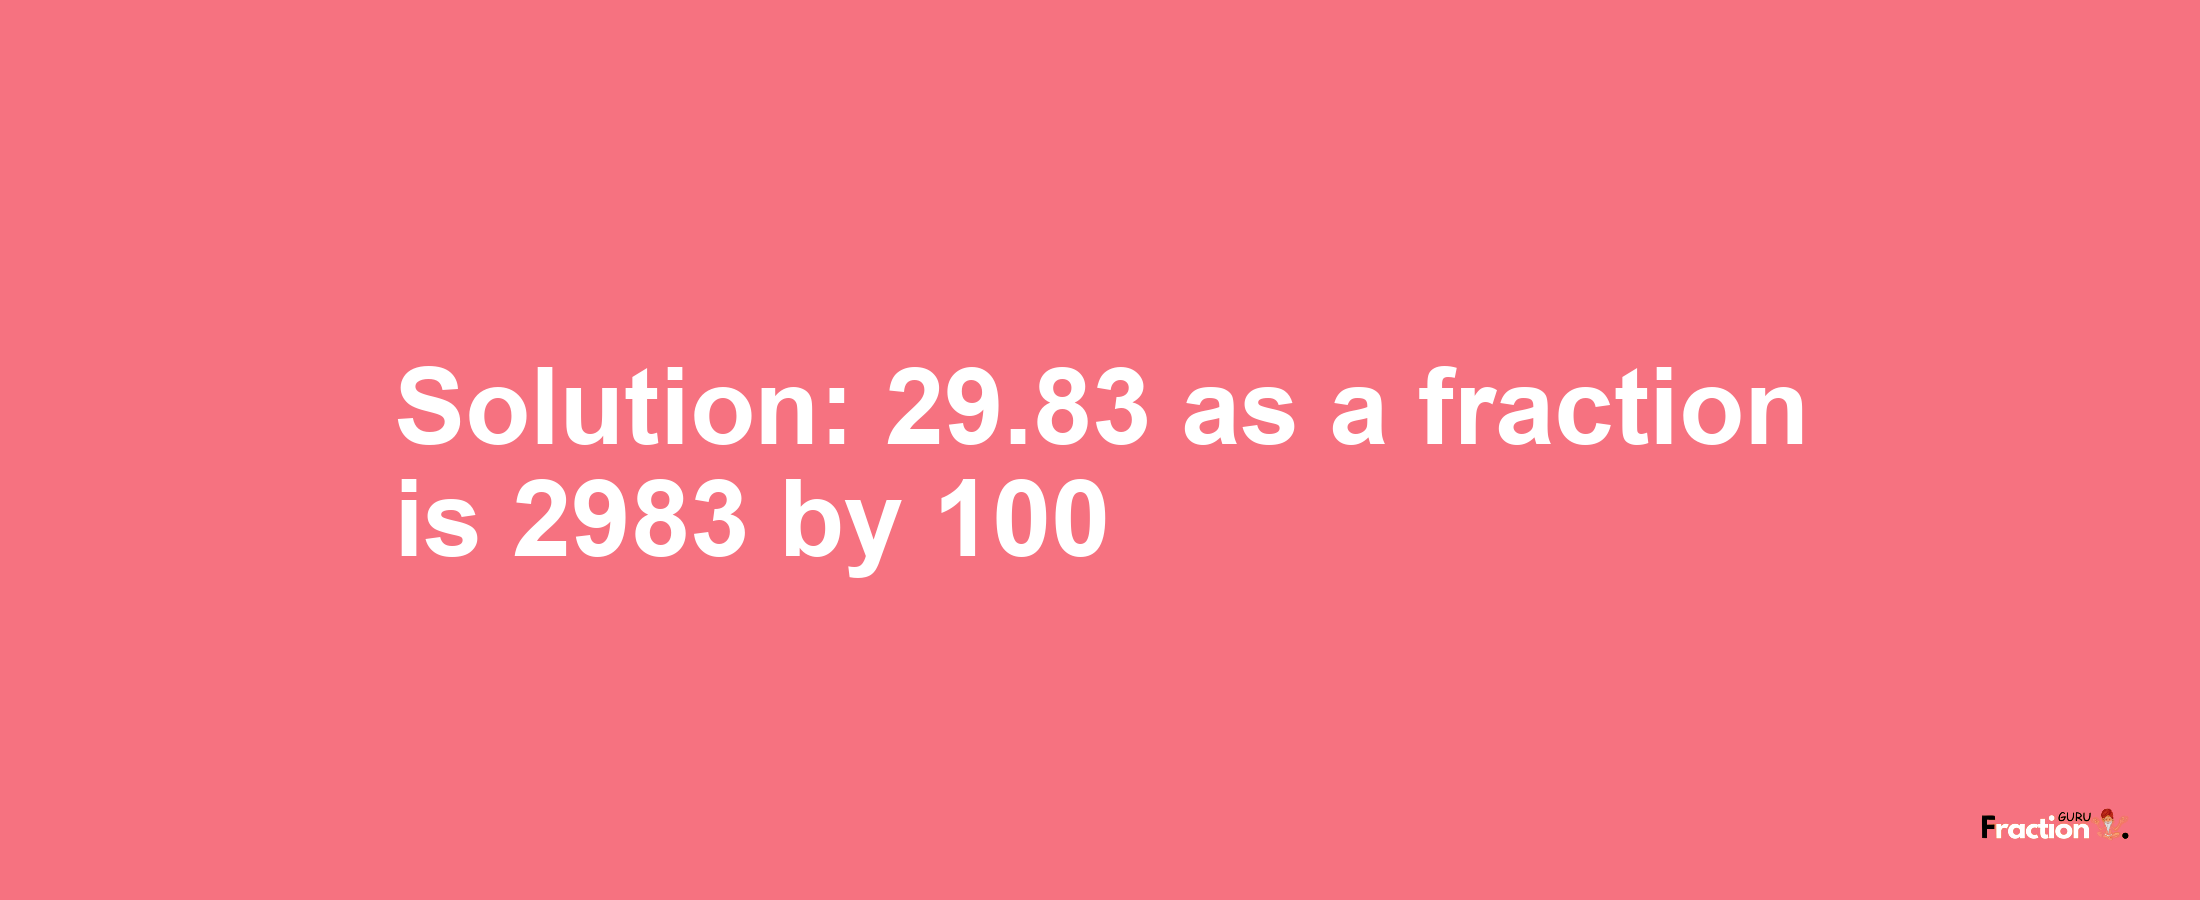 Solution:29.83 as a fraction is 2983/100